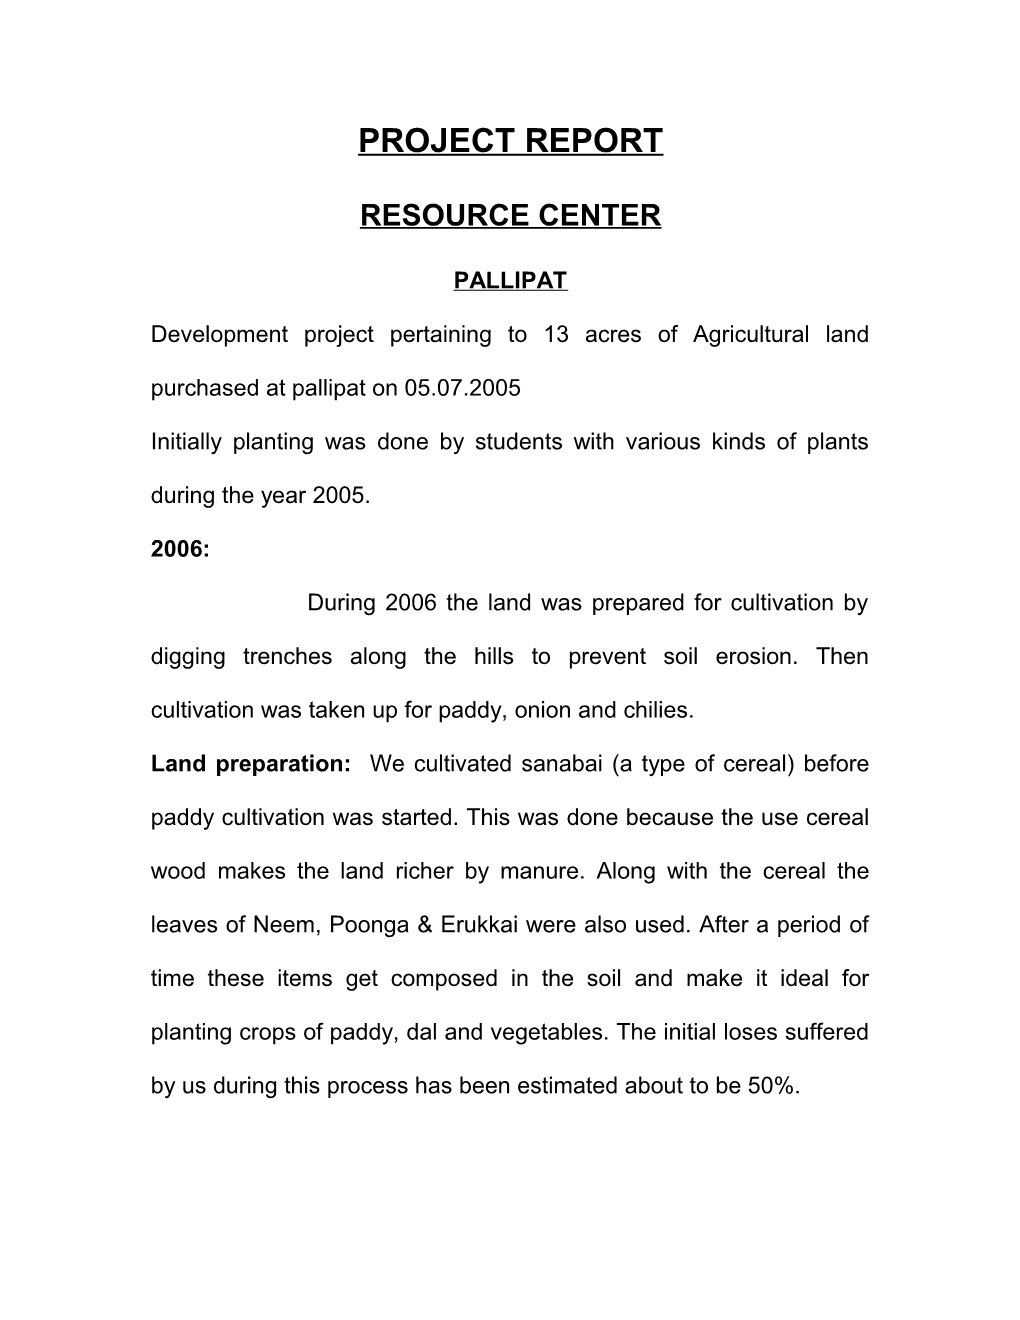 Development Project Pertaining to 13 Acres of Agricultural Land Purchased at Pallipat on 05